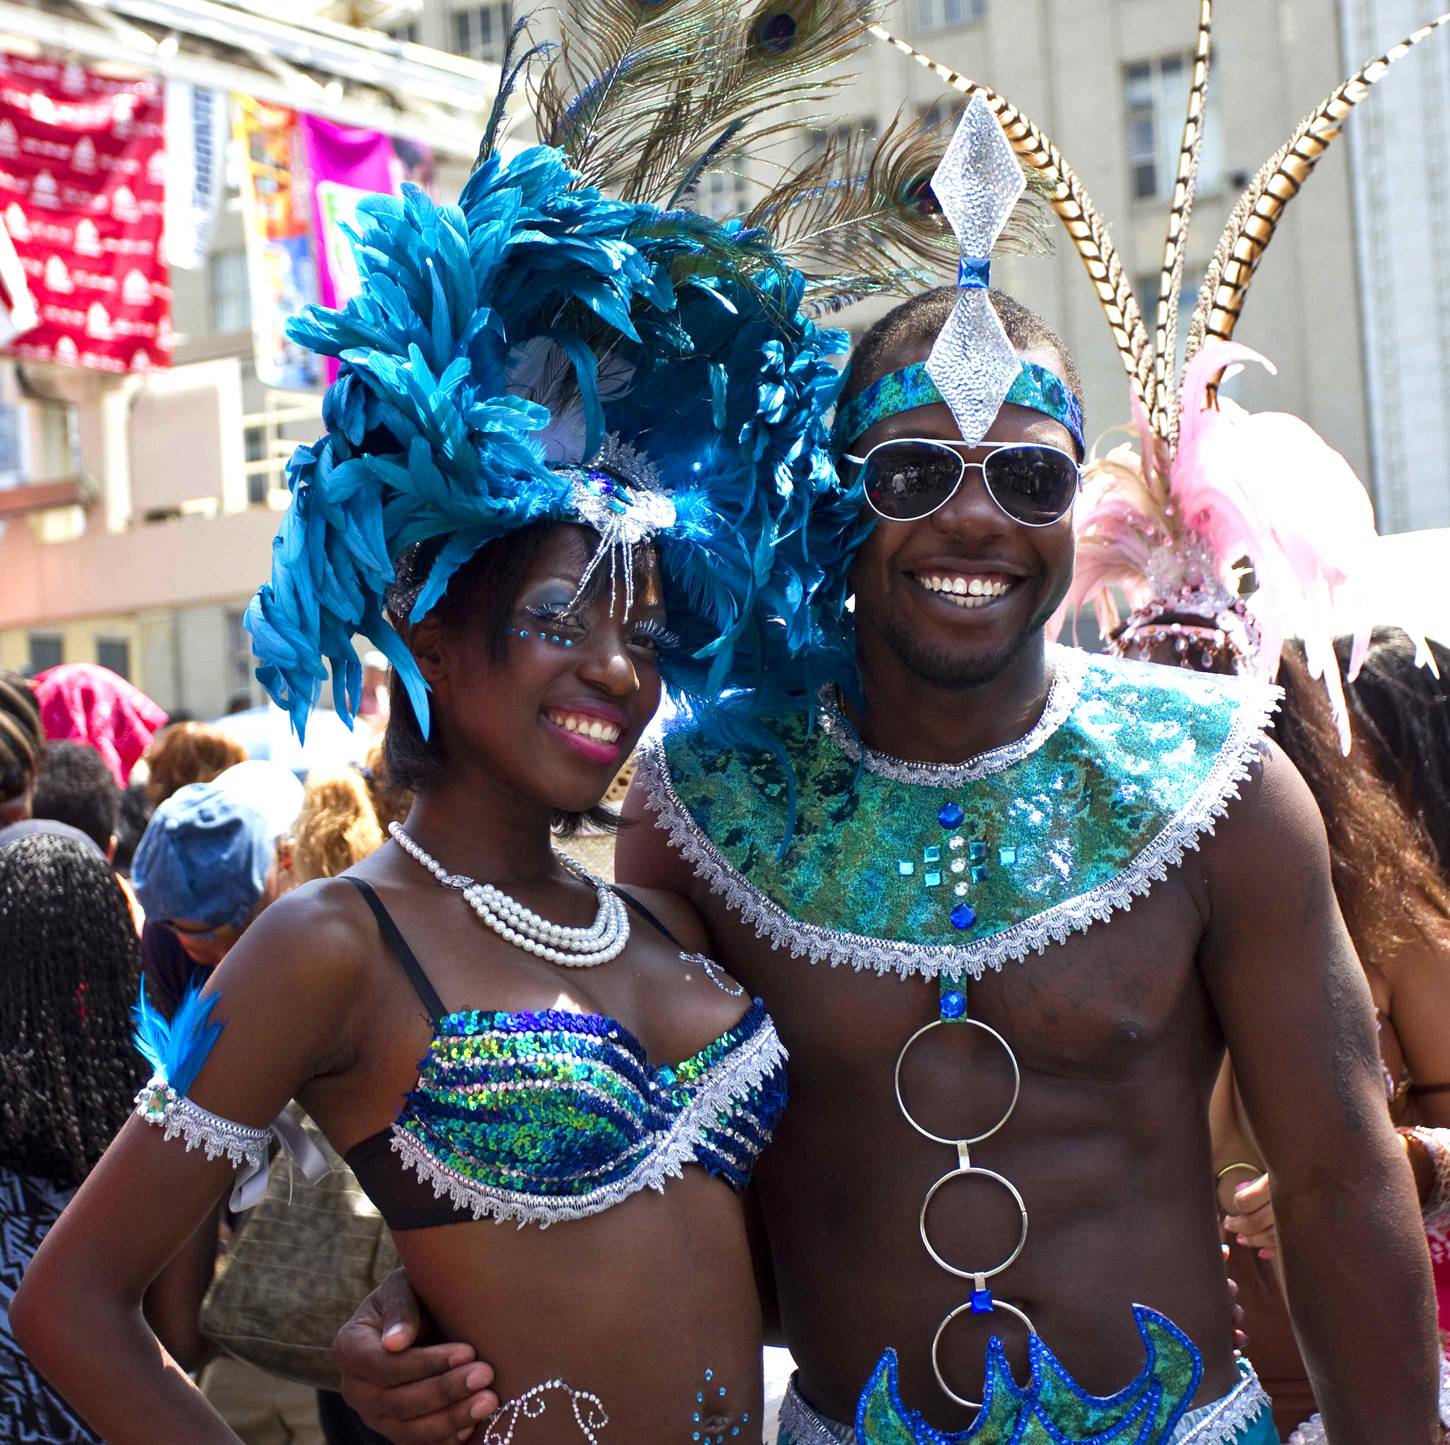 Caribana Festival, Toronto, Canada, July 17-August 5 - Caribbean-inspired events, classes and parties will fill this three-week festival.&nbsp;&nbsp;(Photo: Xinhua/Landov)